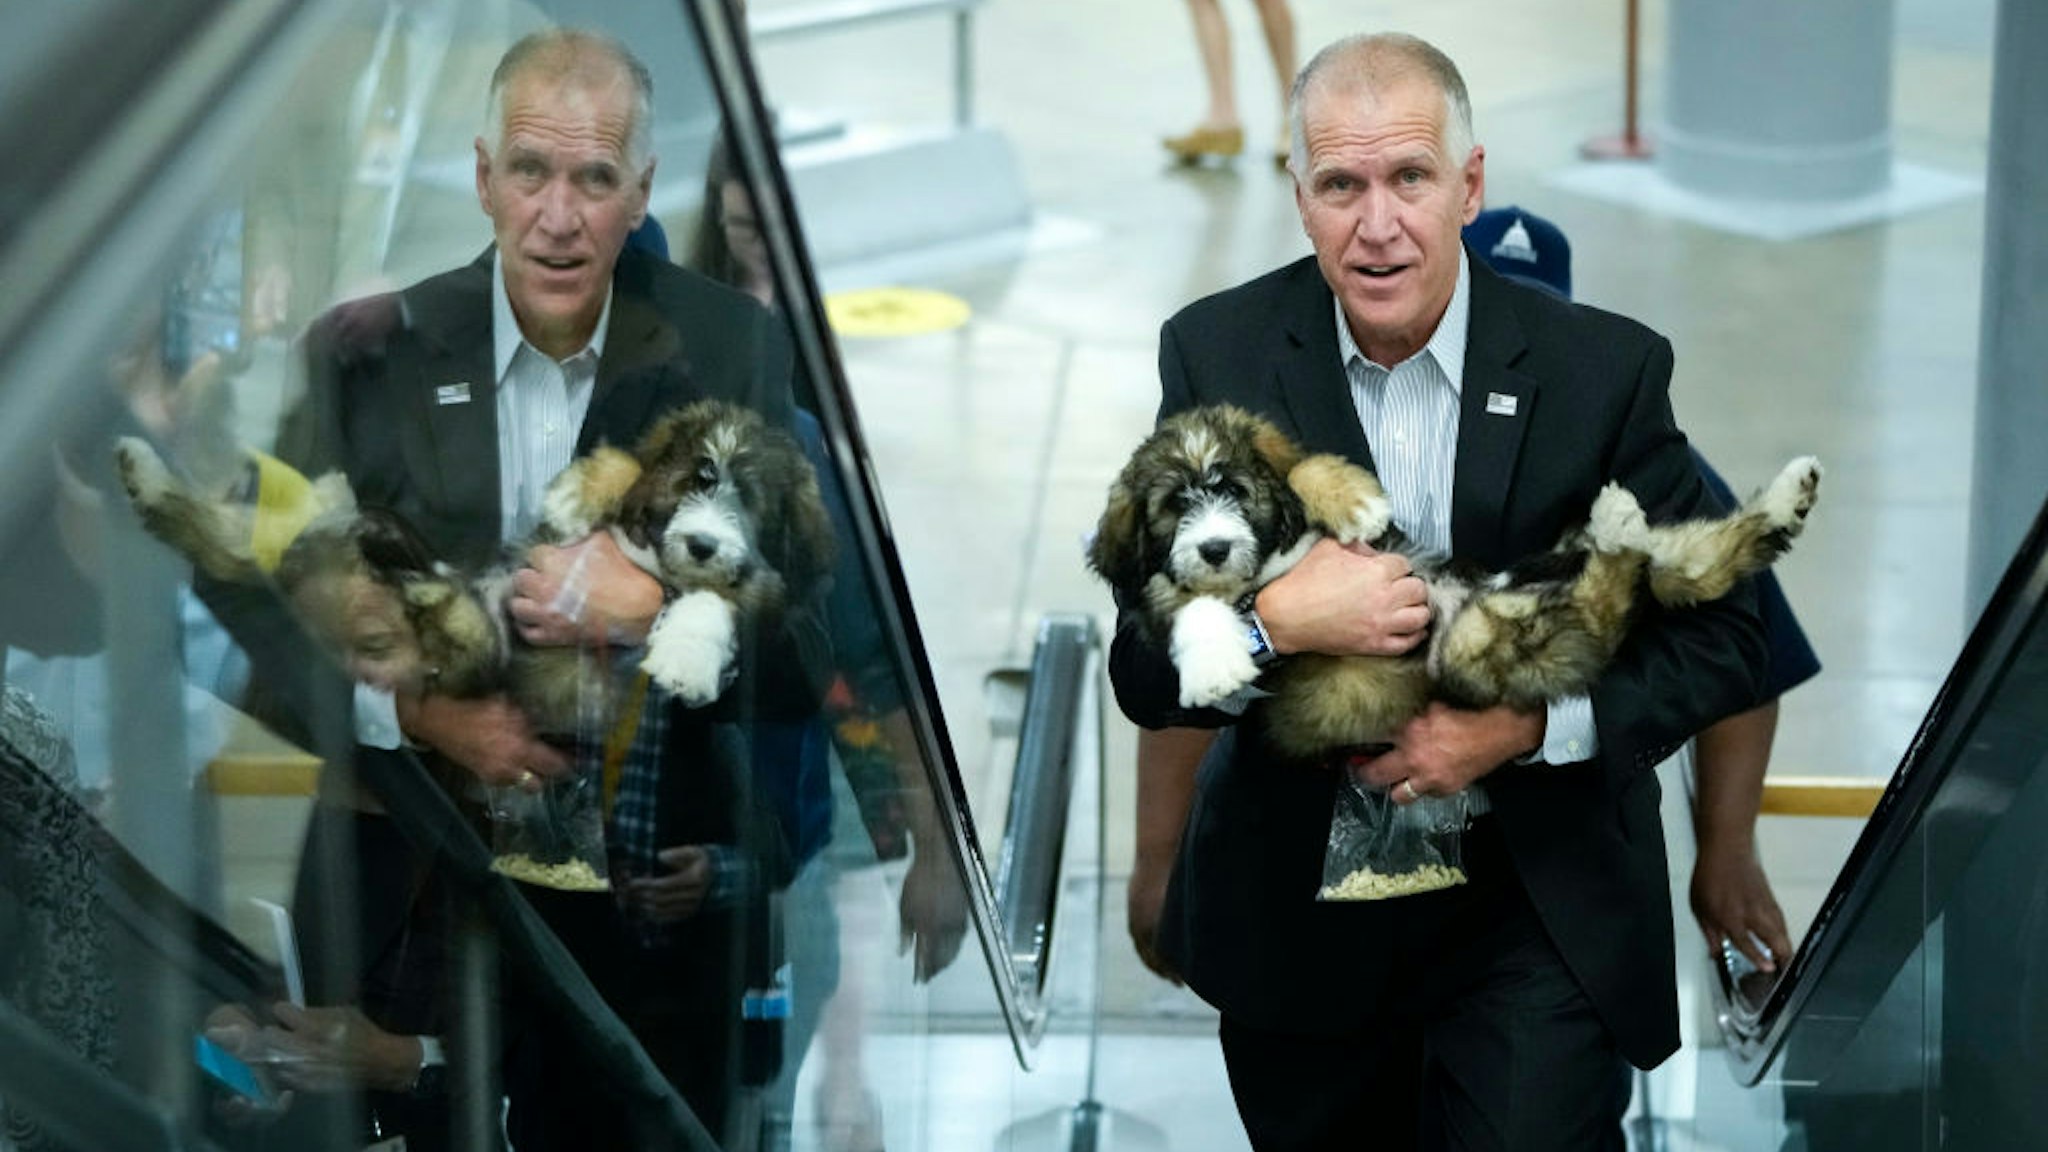 U.S. Sen. Thom Tillis (R-NC) carries his dog Theo through the Senate subway on his way to a vote at the Capitol on June 21, 2021 in Washington, DC. With a July 4 recess upcoming, Congress will resume negotiations this week on voting rights, infrastructure and police reform legislation.